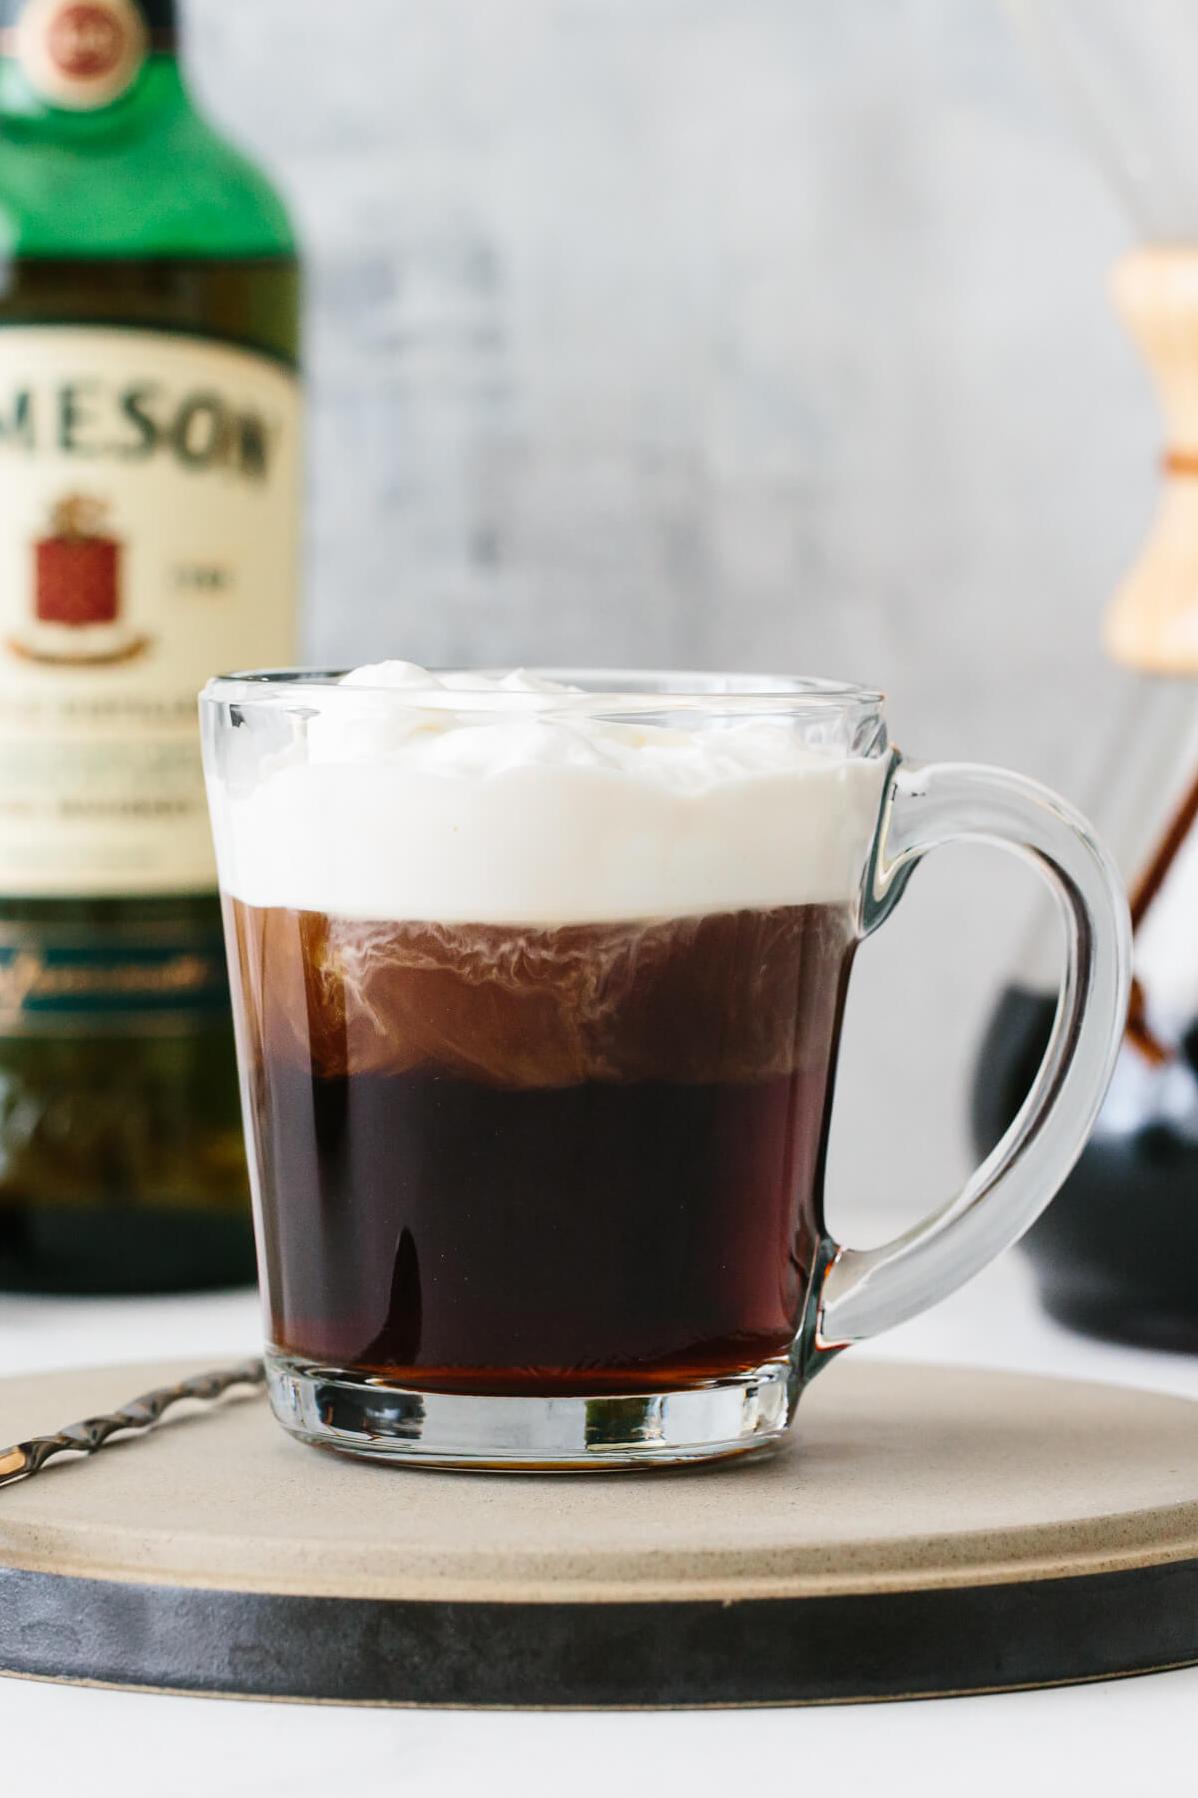  With its rich flavor and smooth texture, Dad's Irish Coffee can easily become your new favorite drink.